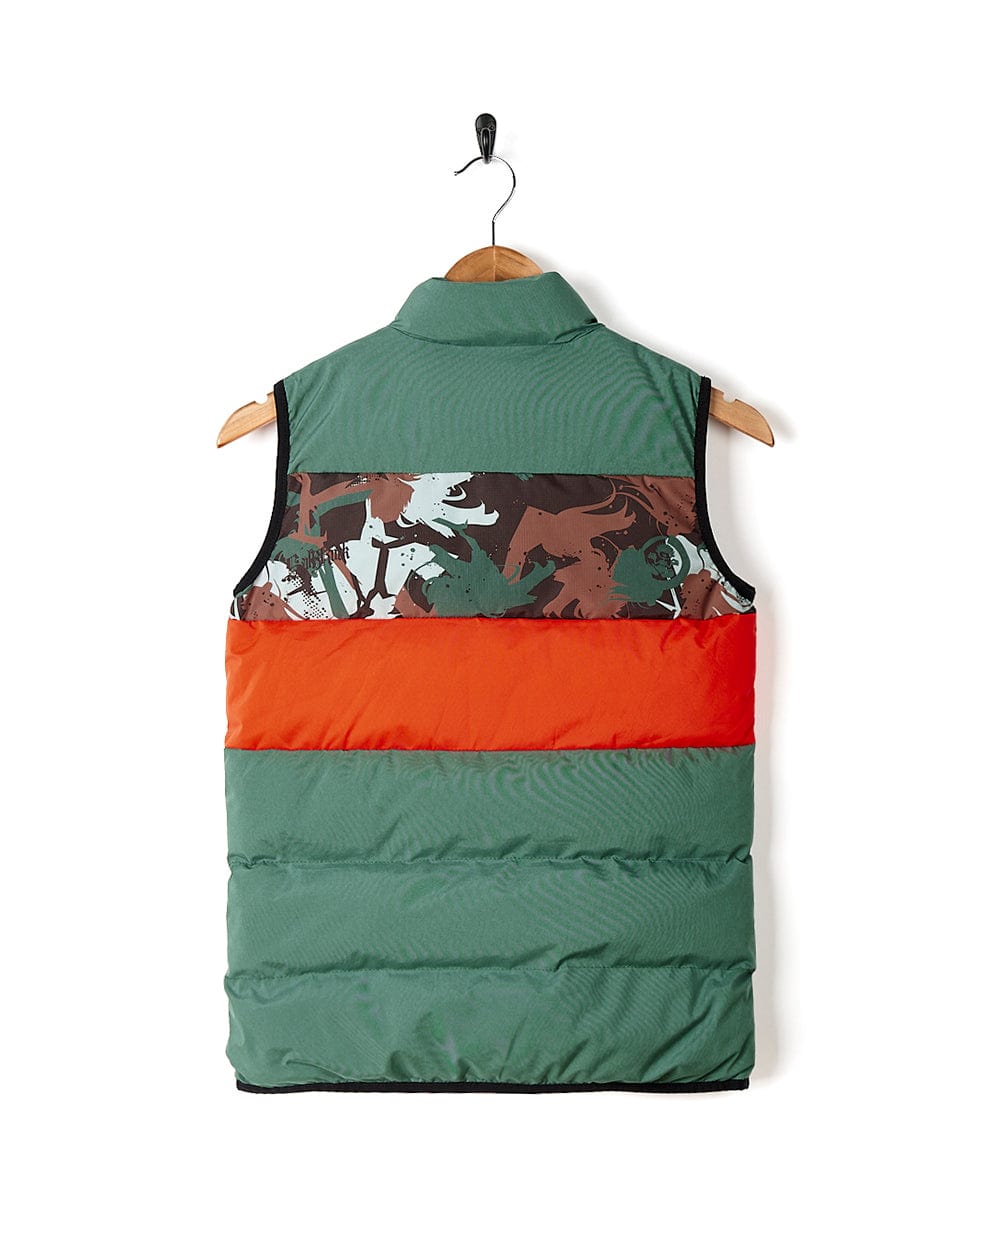 A Destroya - Kids Padded Gilet - Green/Camo with orange and green stripes by Saltrock.